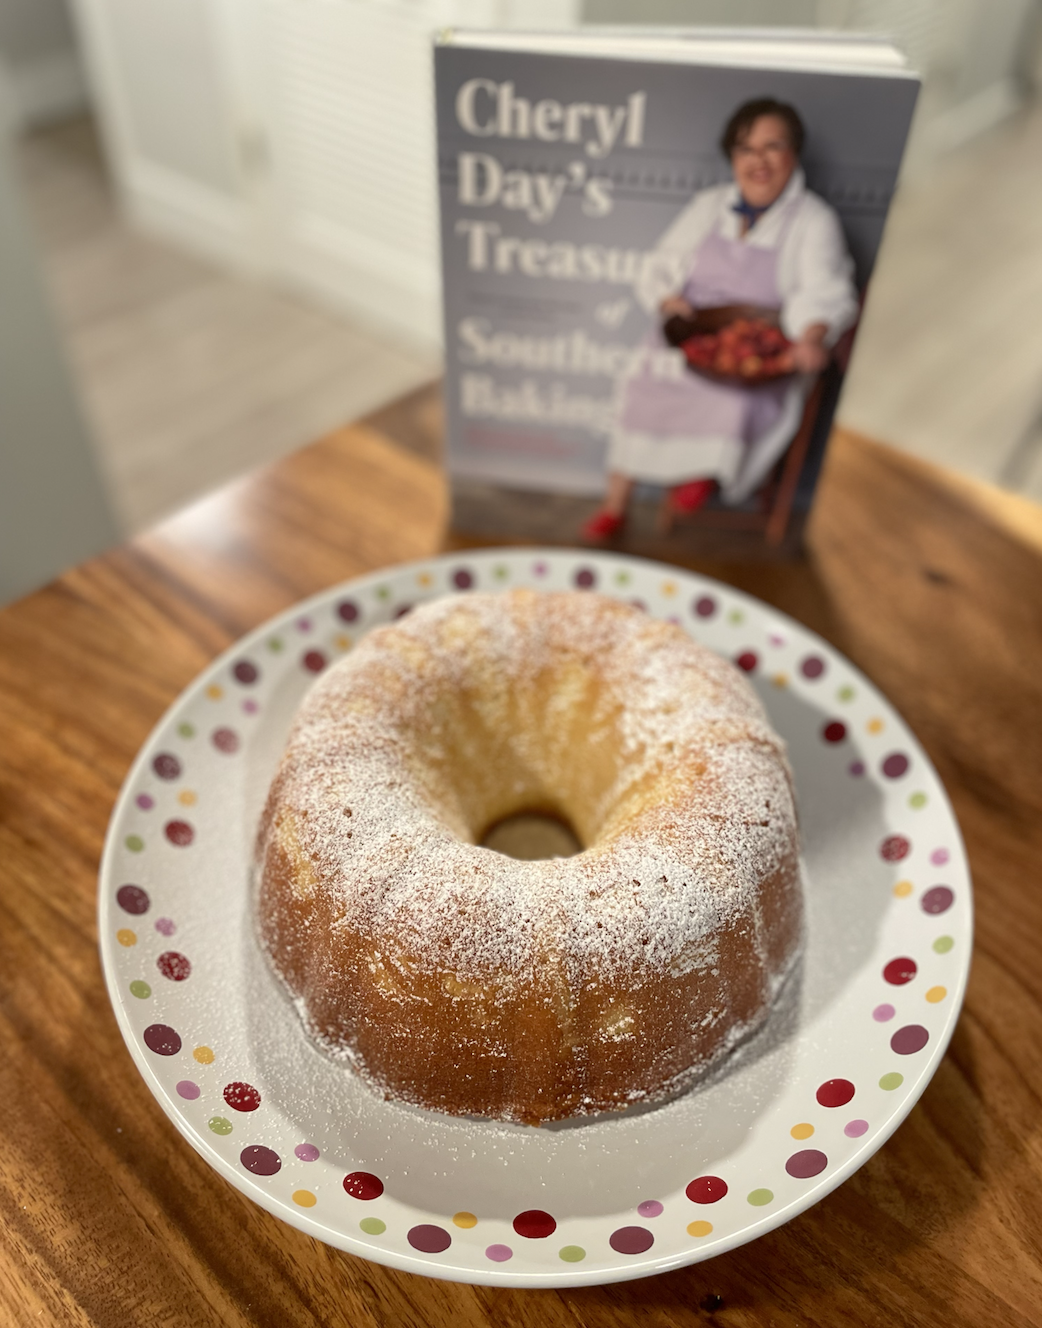 Photo of a light golden Bundt pound cake dusted with powdered sugar on a dotted serving plate on a wooden table next to the cookbook Cheryl Day's Treasury of Southern Baking